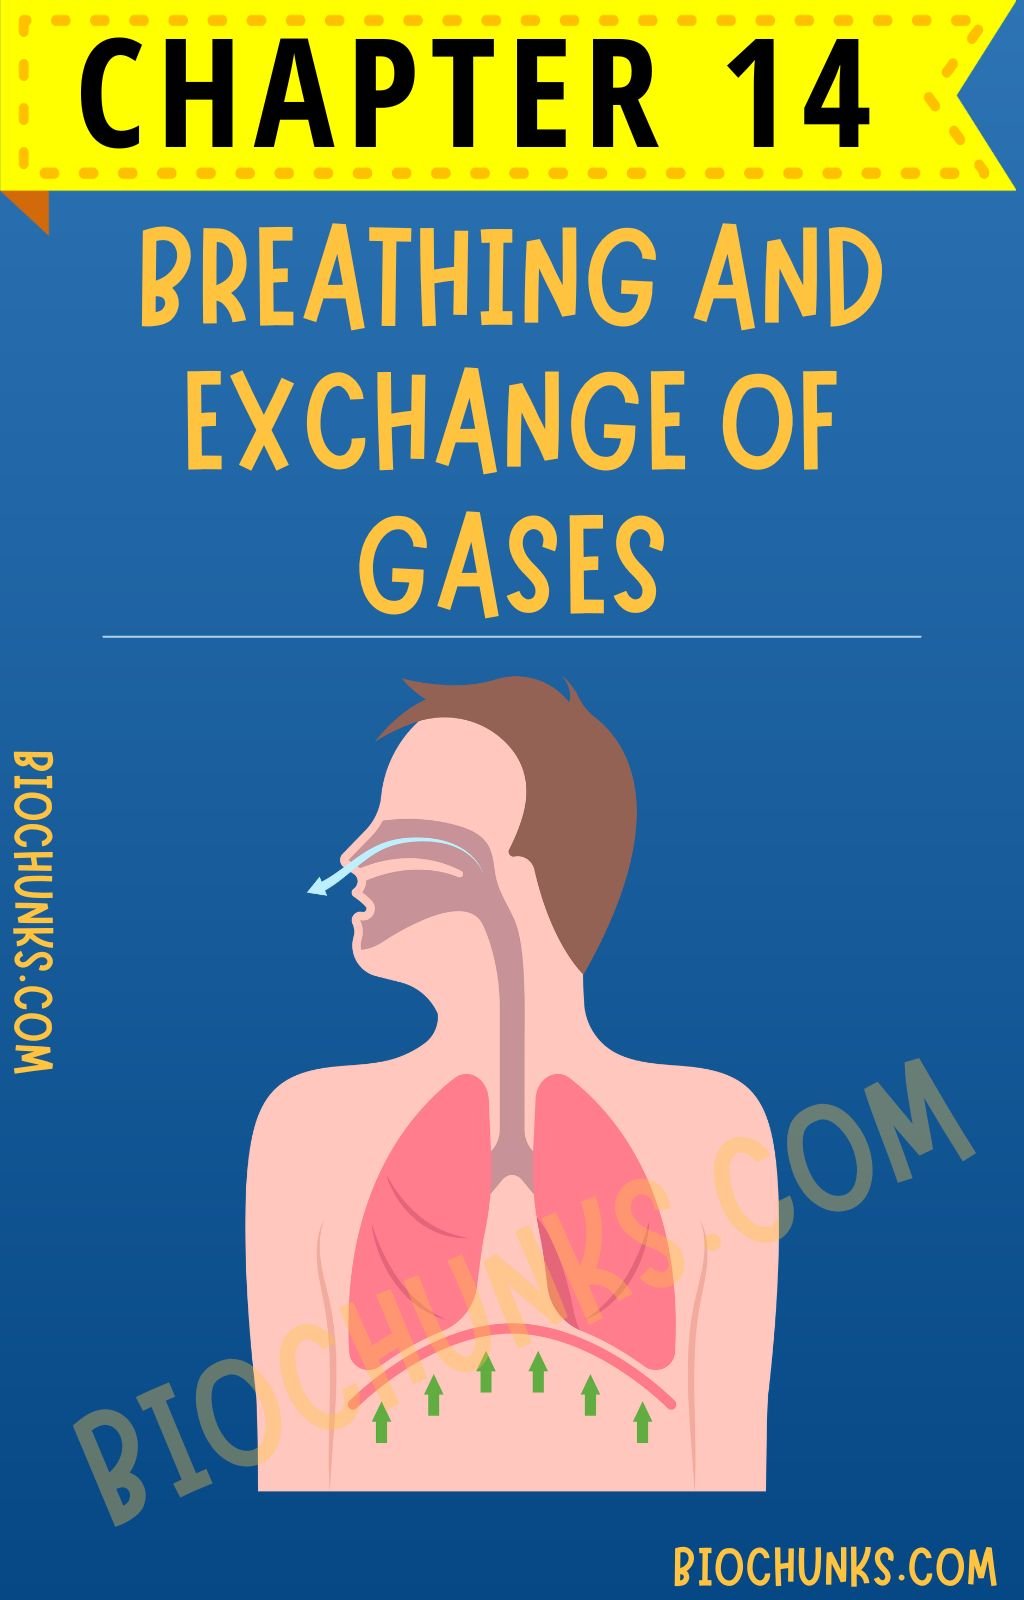 Breathing and Exchange of Gases Chapter 14 Class 11th biochunks.com